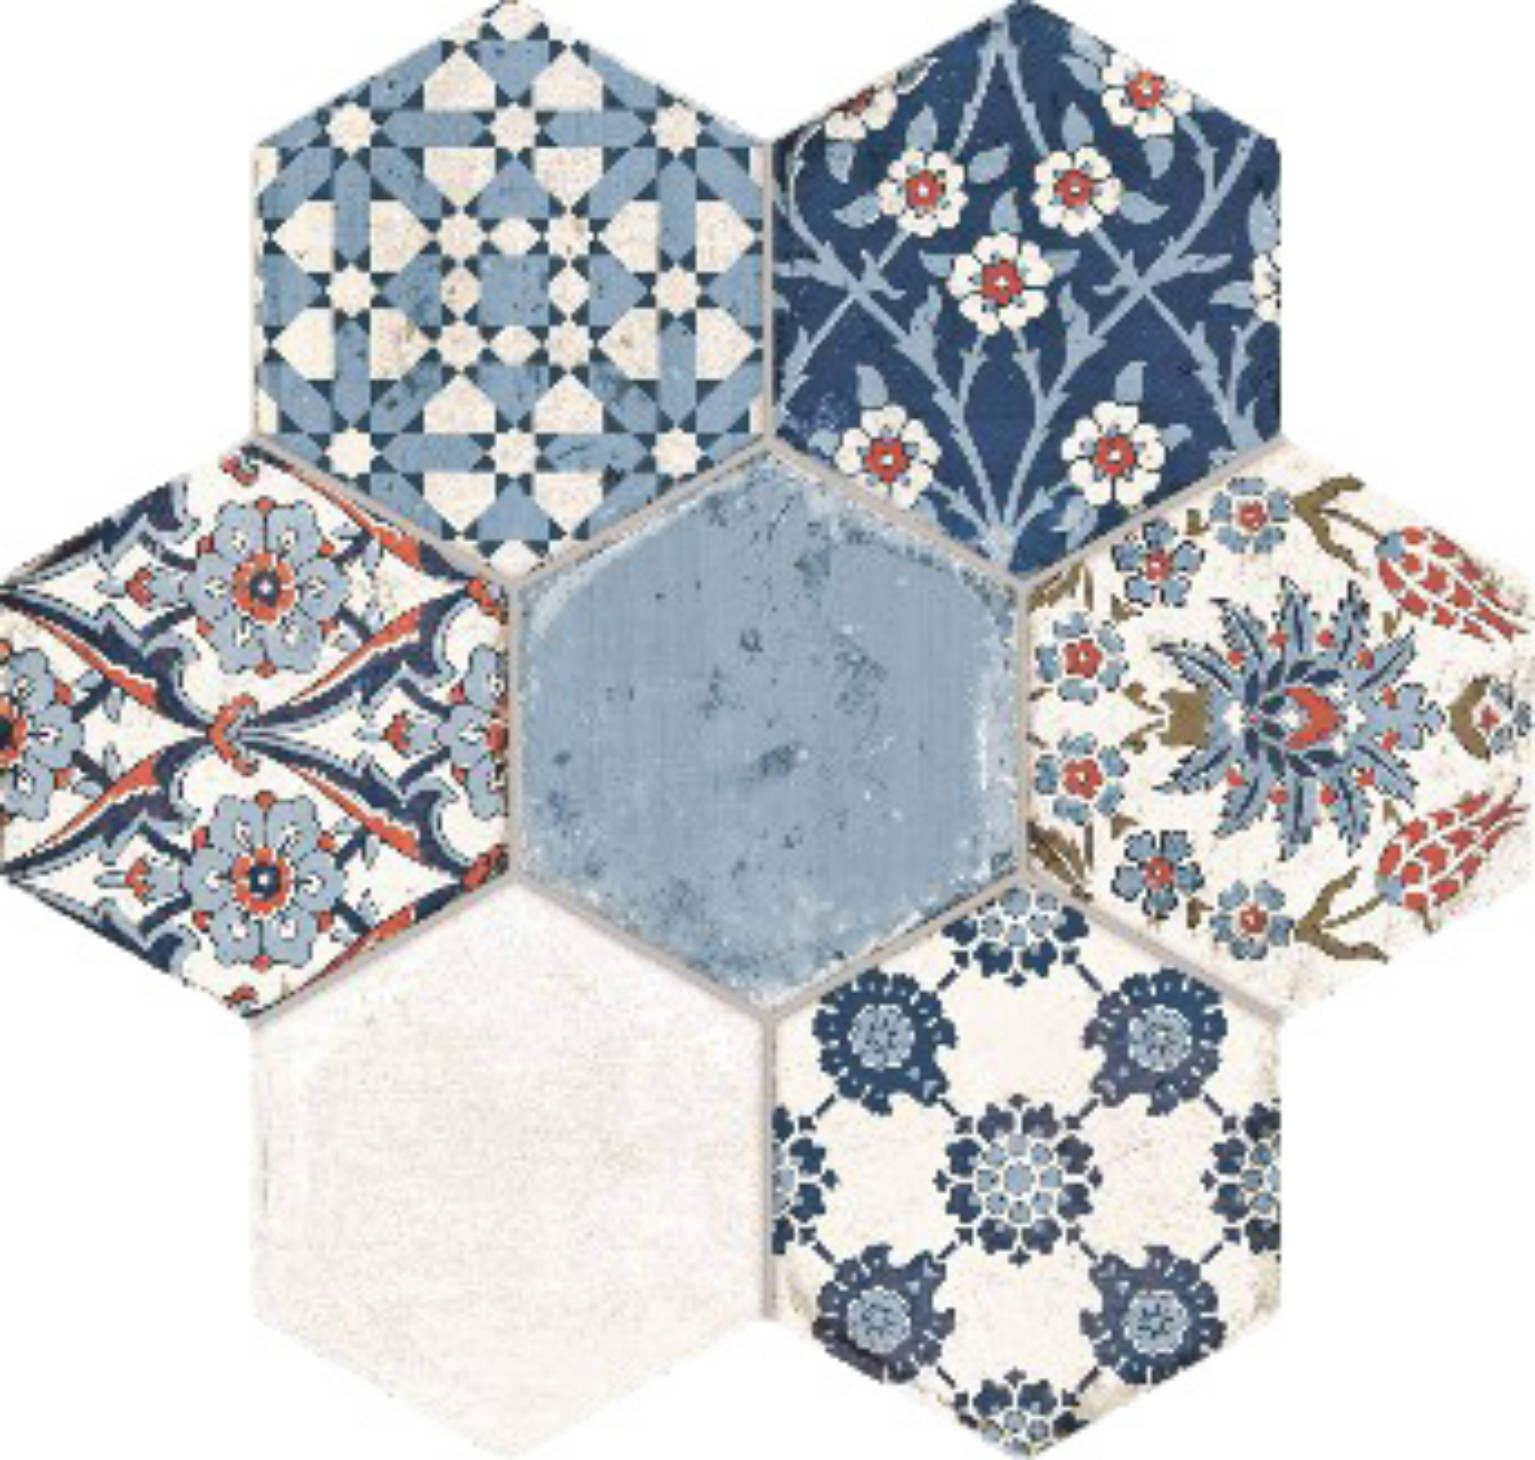 Nazari | Stones & More | Finest selection of Mosaics, Glass, Tile and Stone